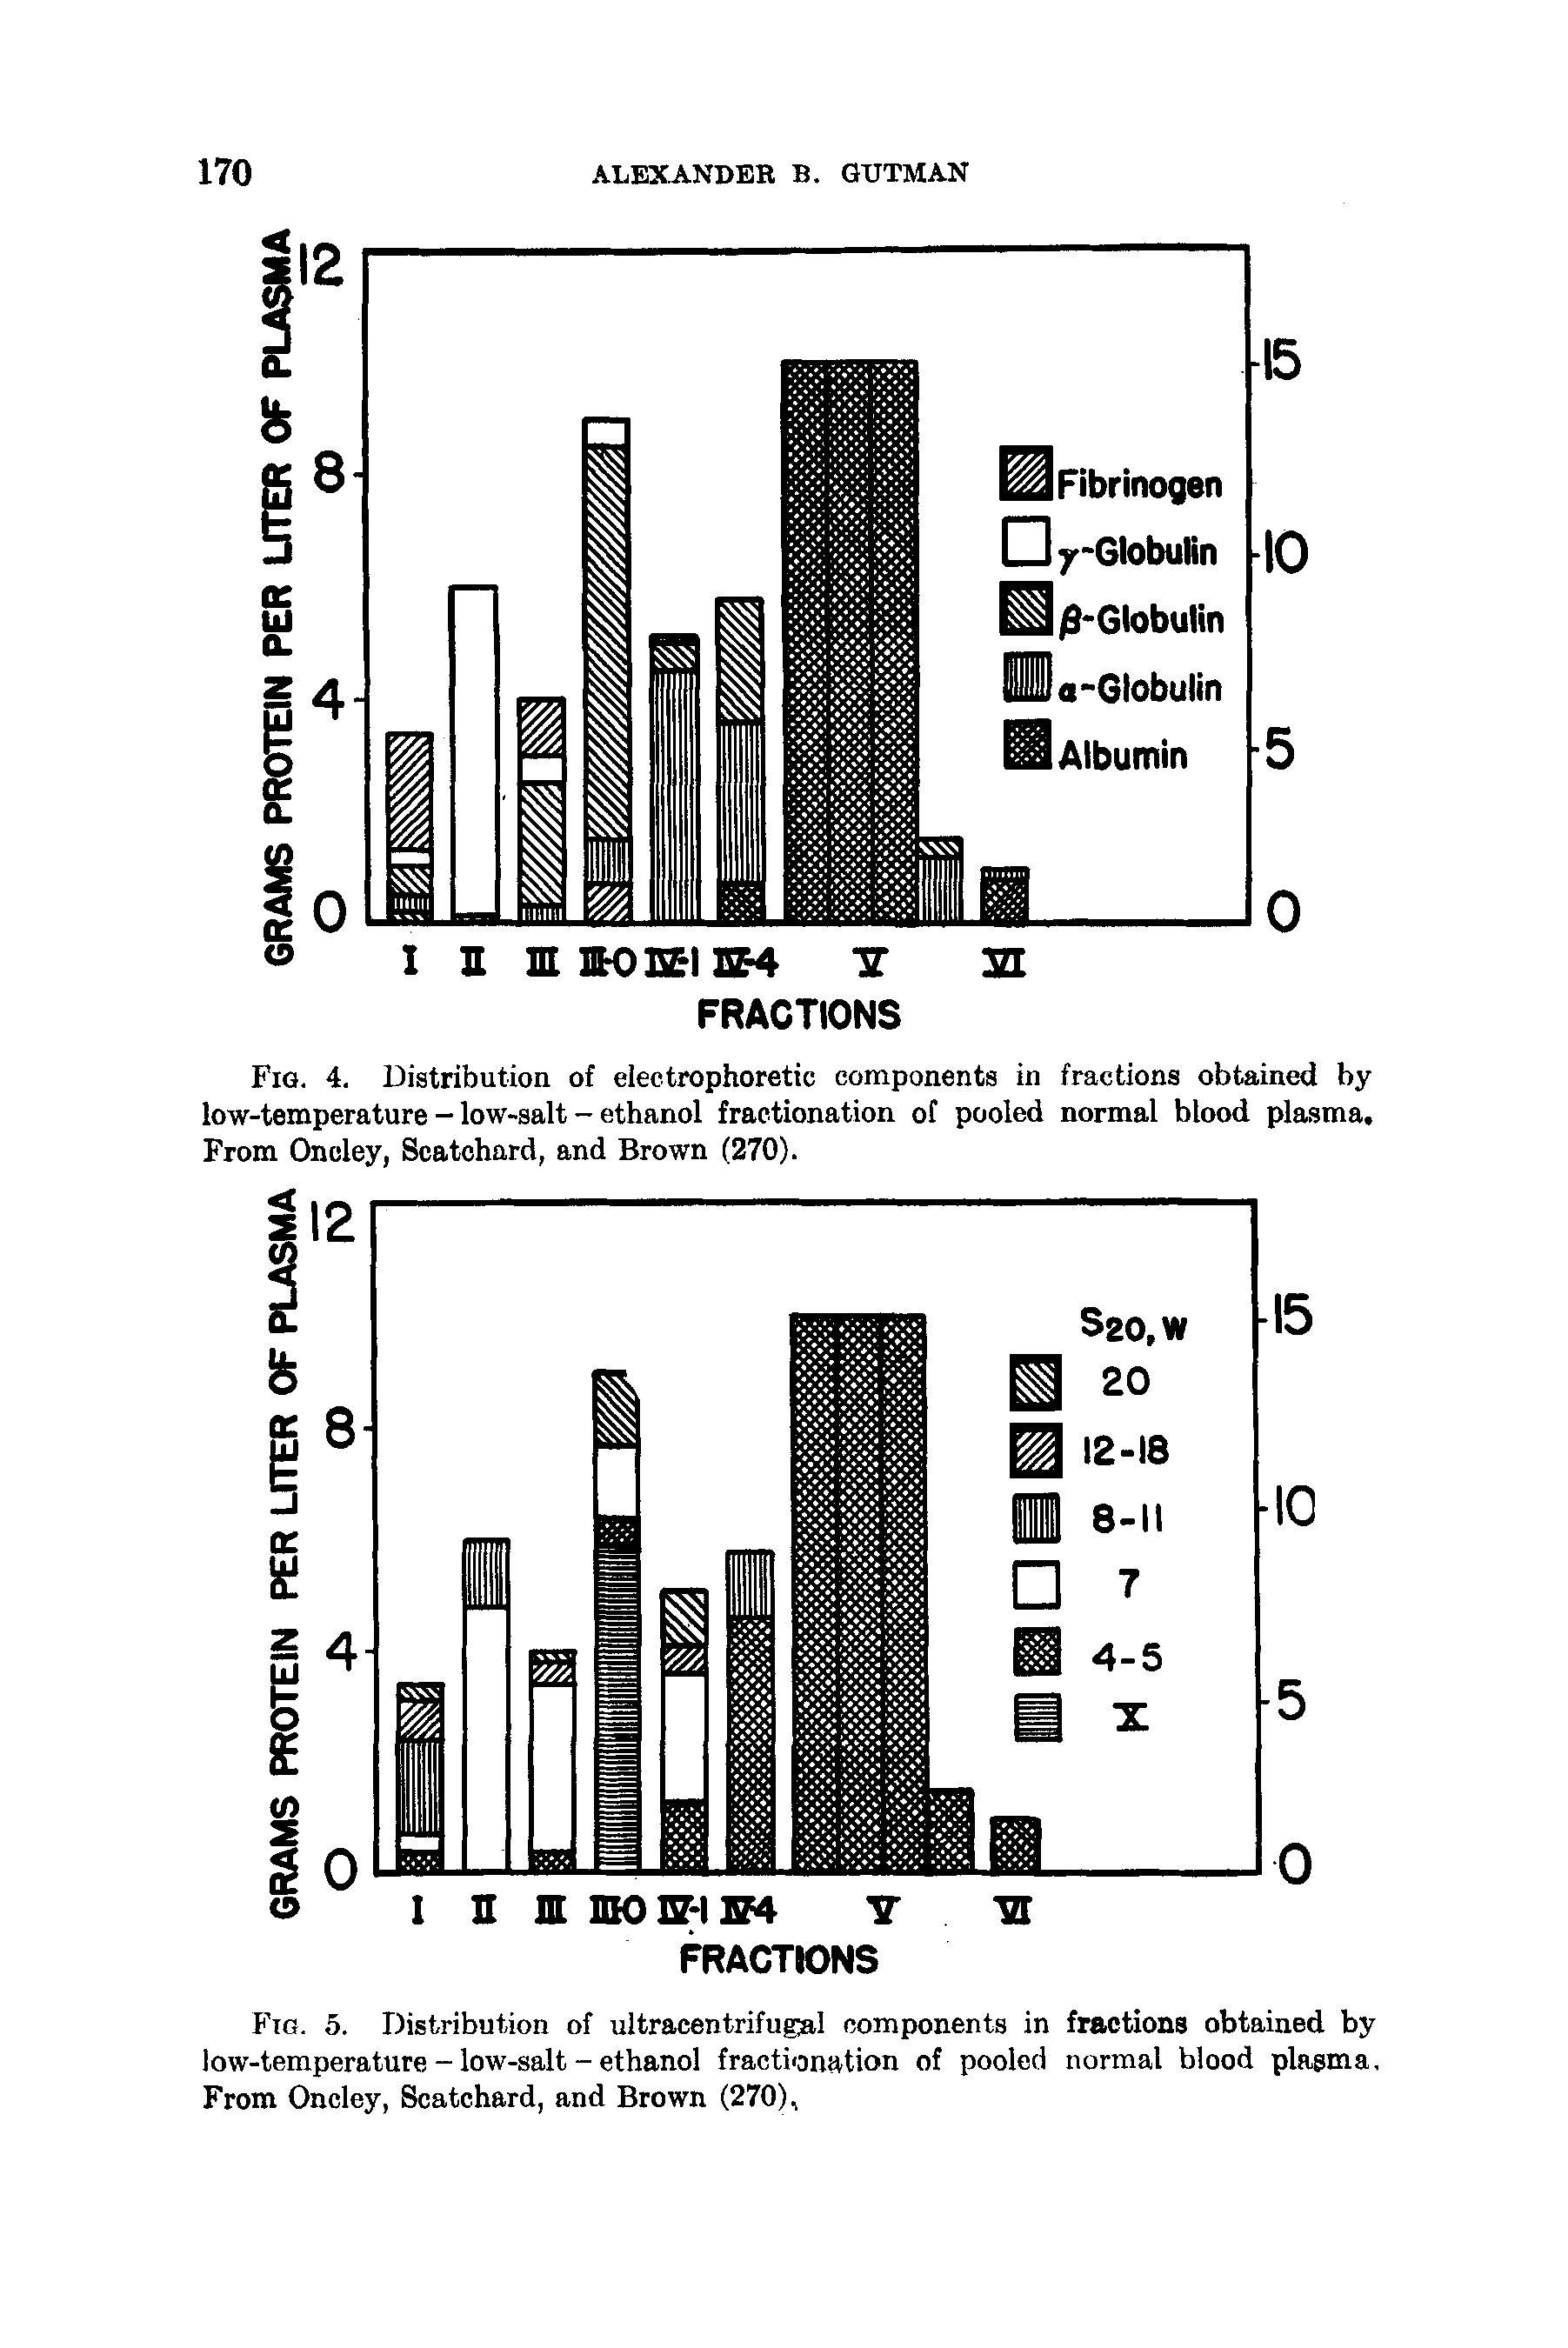 Fig. 4. Distribution of electrophoretic components in fractions obtained by low-temperature - low-salt - ethanol fractionation of pooled normal blood plasma. From Oncley, Scatohard, and Brown (270).